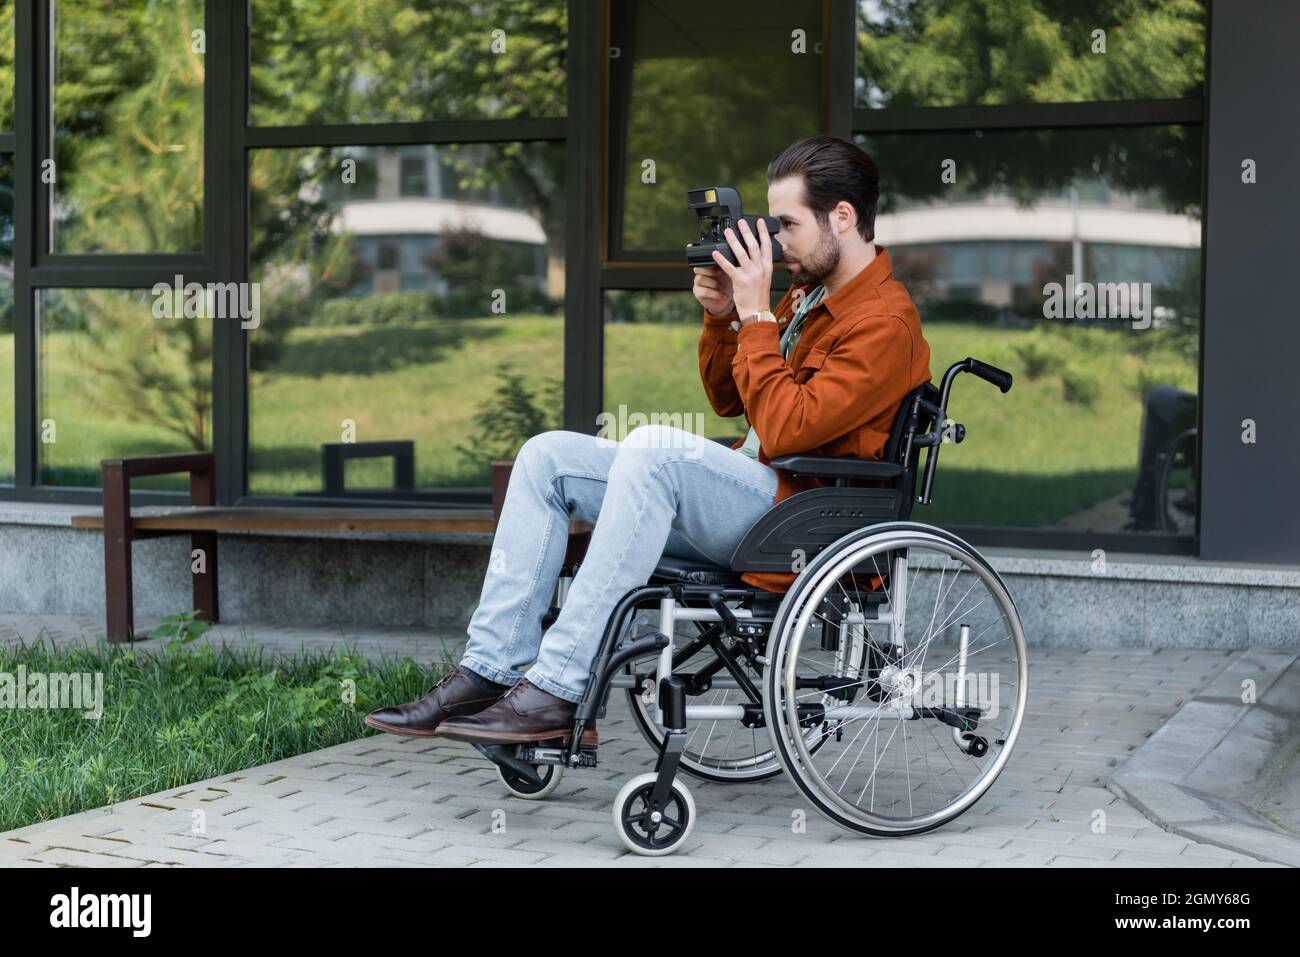 young disabled man in wheelchair taking photo on vintage camera near building with glass facade Stock Photo